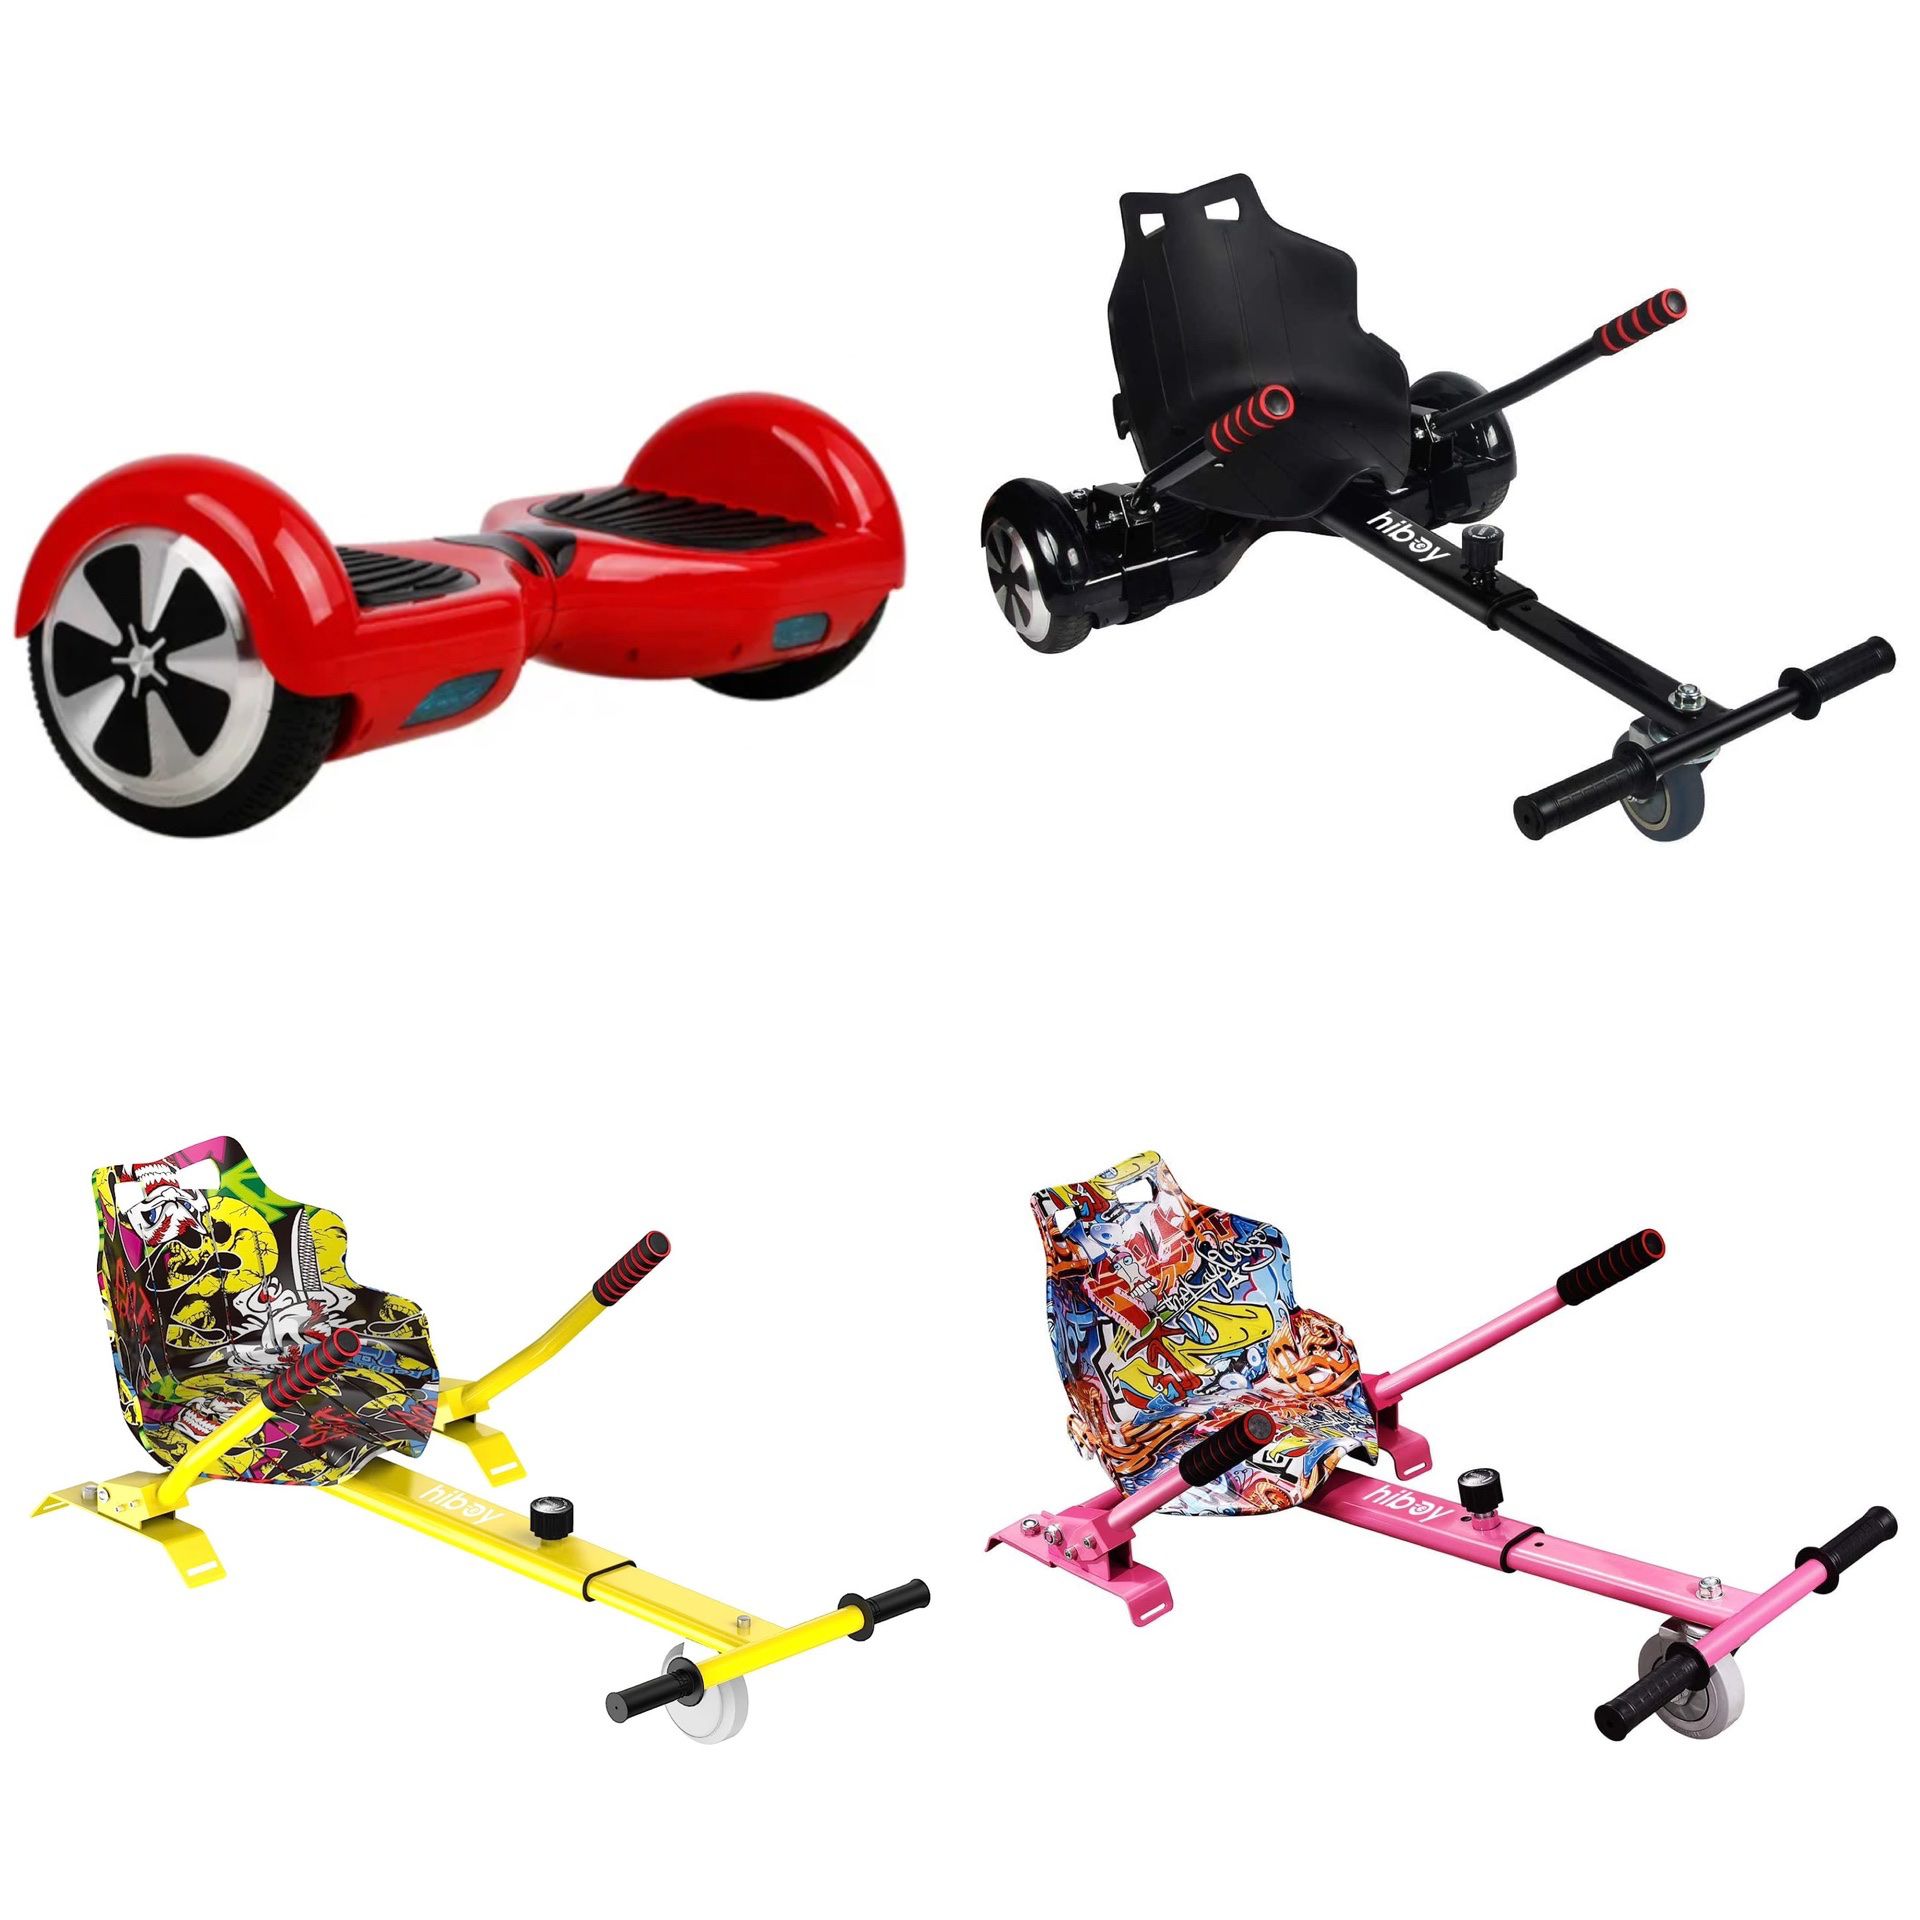 HoverKart, Toy, Hoverboard with the Hoverkart frame, GoKart. $150 INCLUDE BOTH THE HOVERBOARD AND THE FRAME!